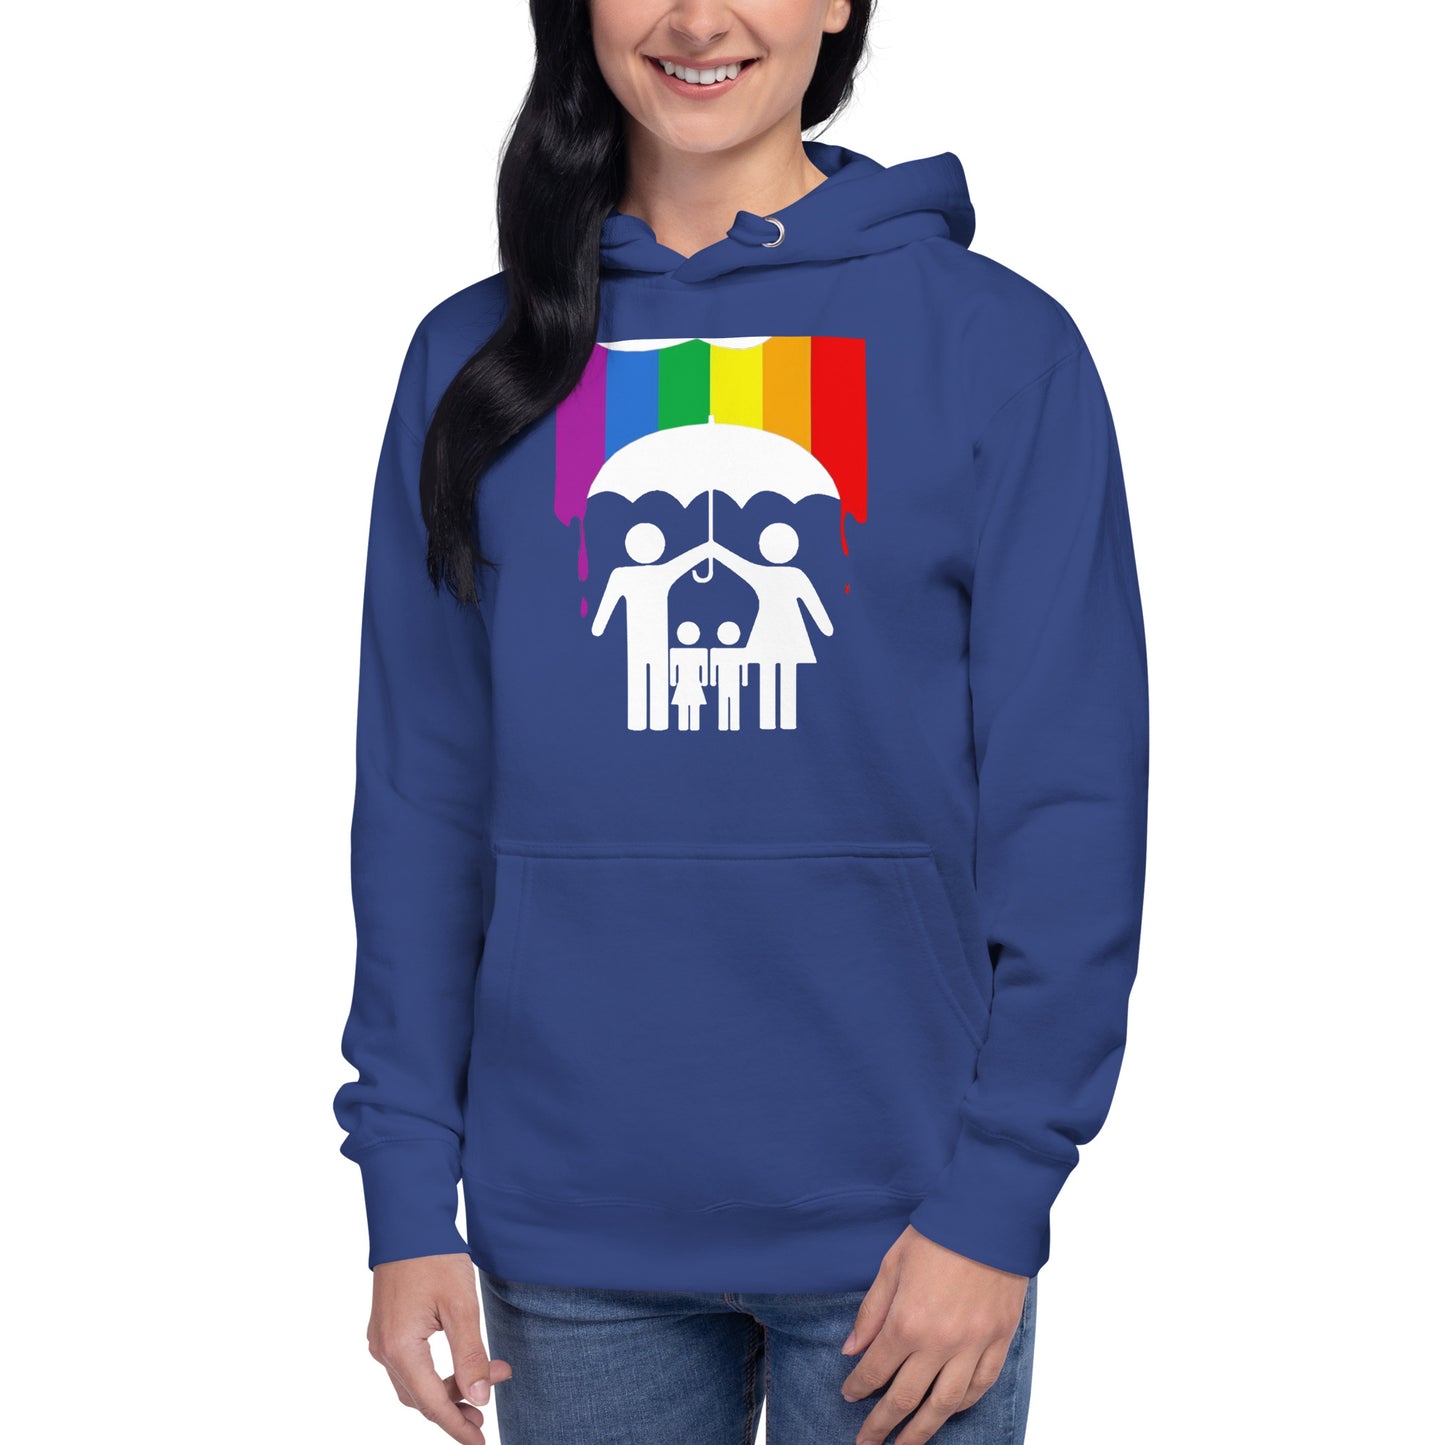 6 - Family Pride Sweater - Black, Navy Blue + More